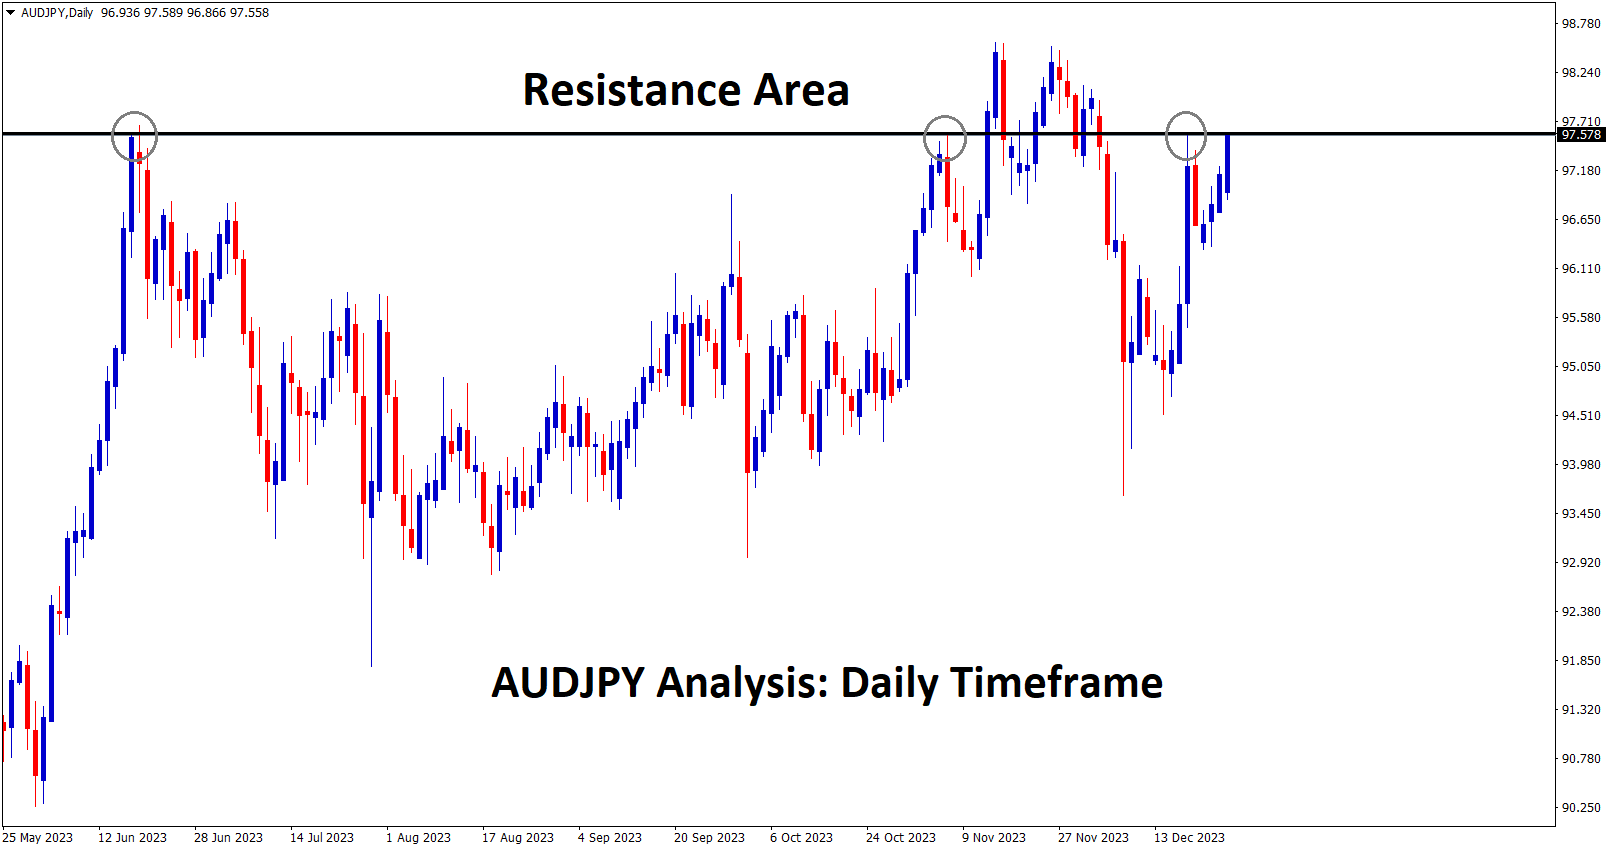 AUDJPY at the major resistance area